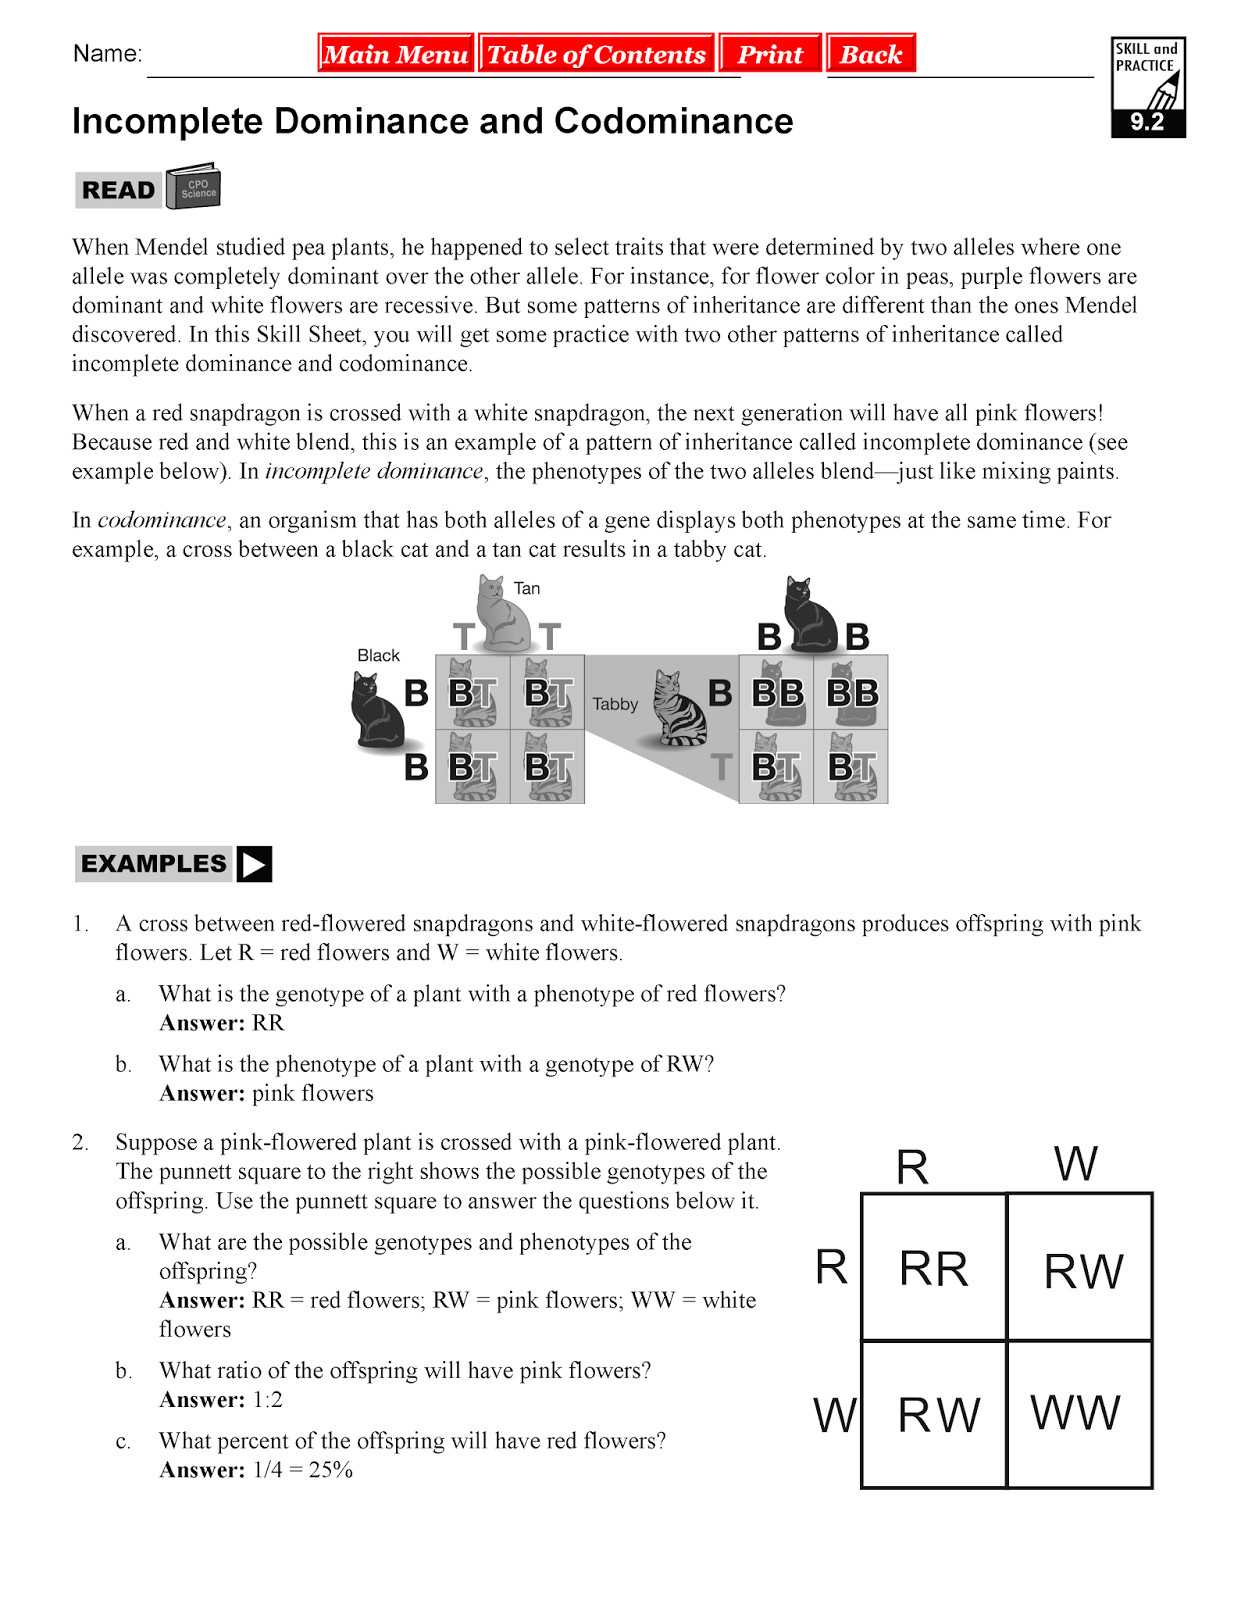 Codominance Worksheet Blood Types Along with In Plete Dominance and Codominance Worksheet Answer Key Best